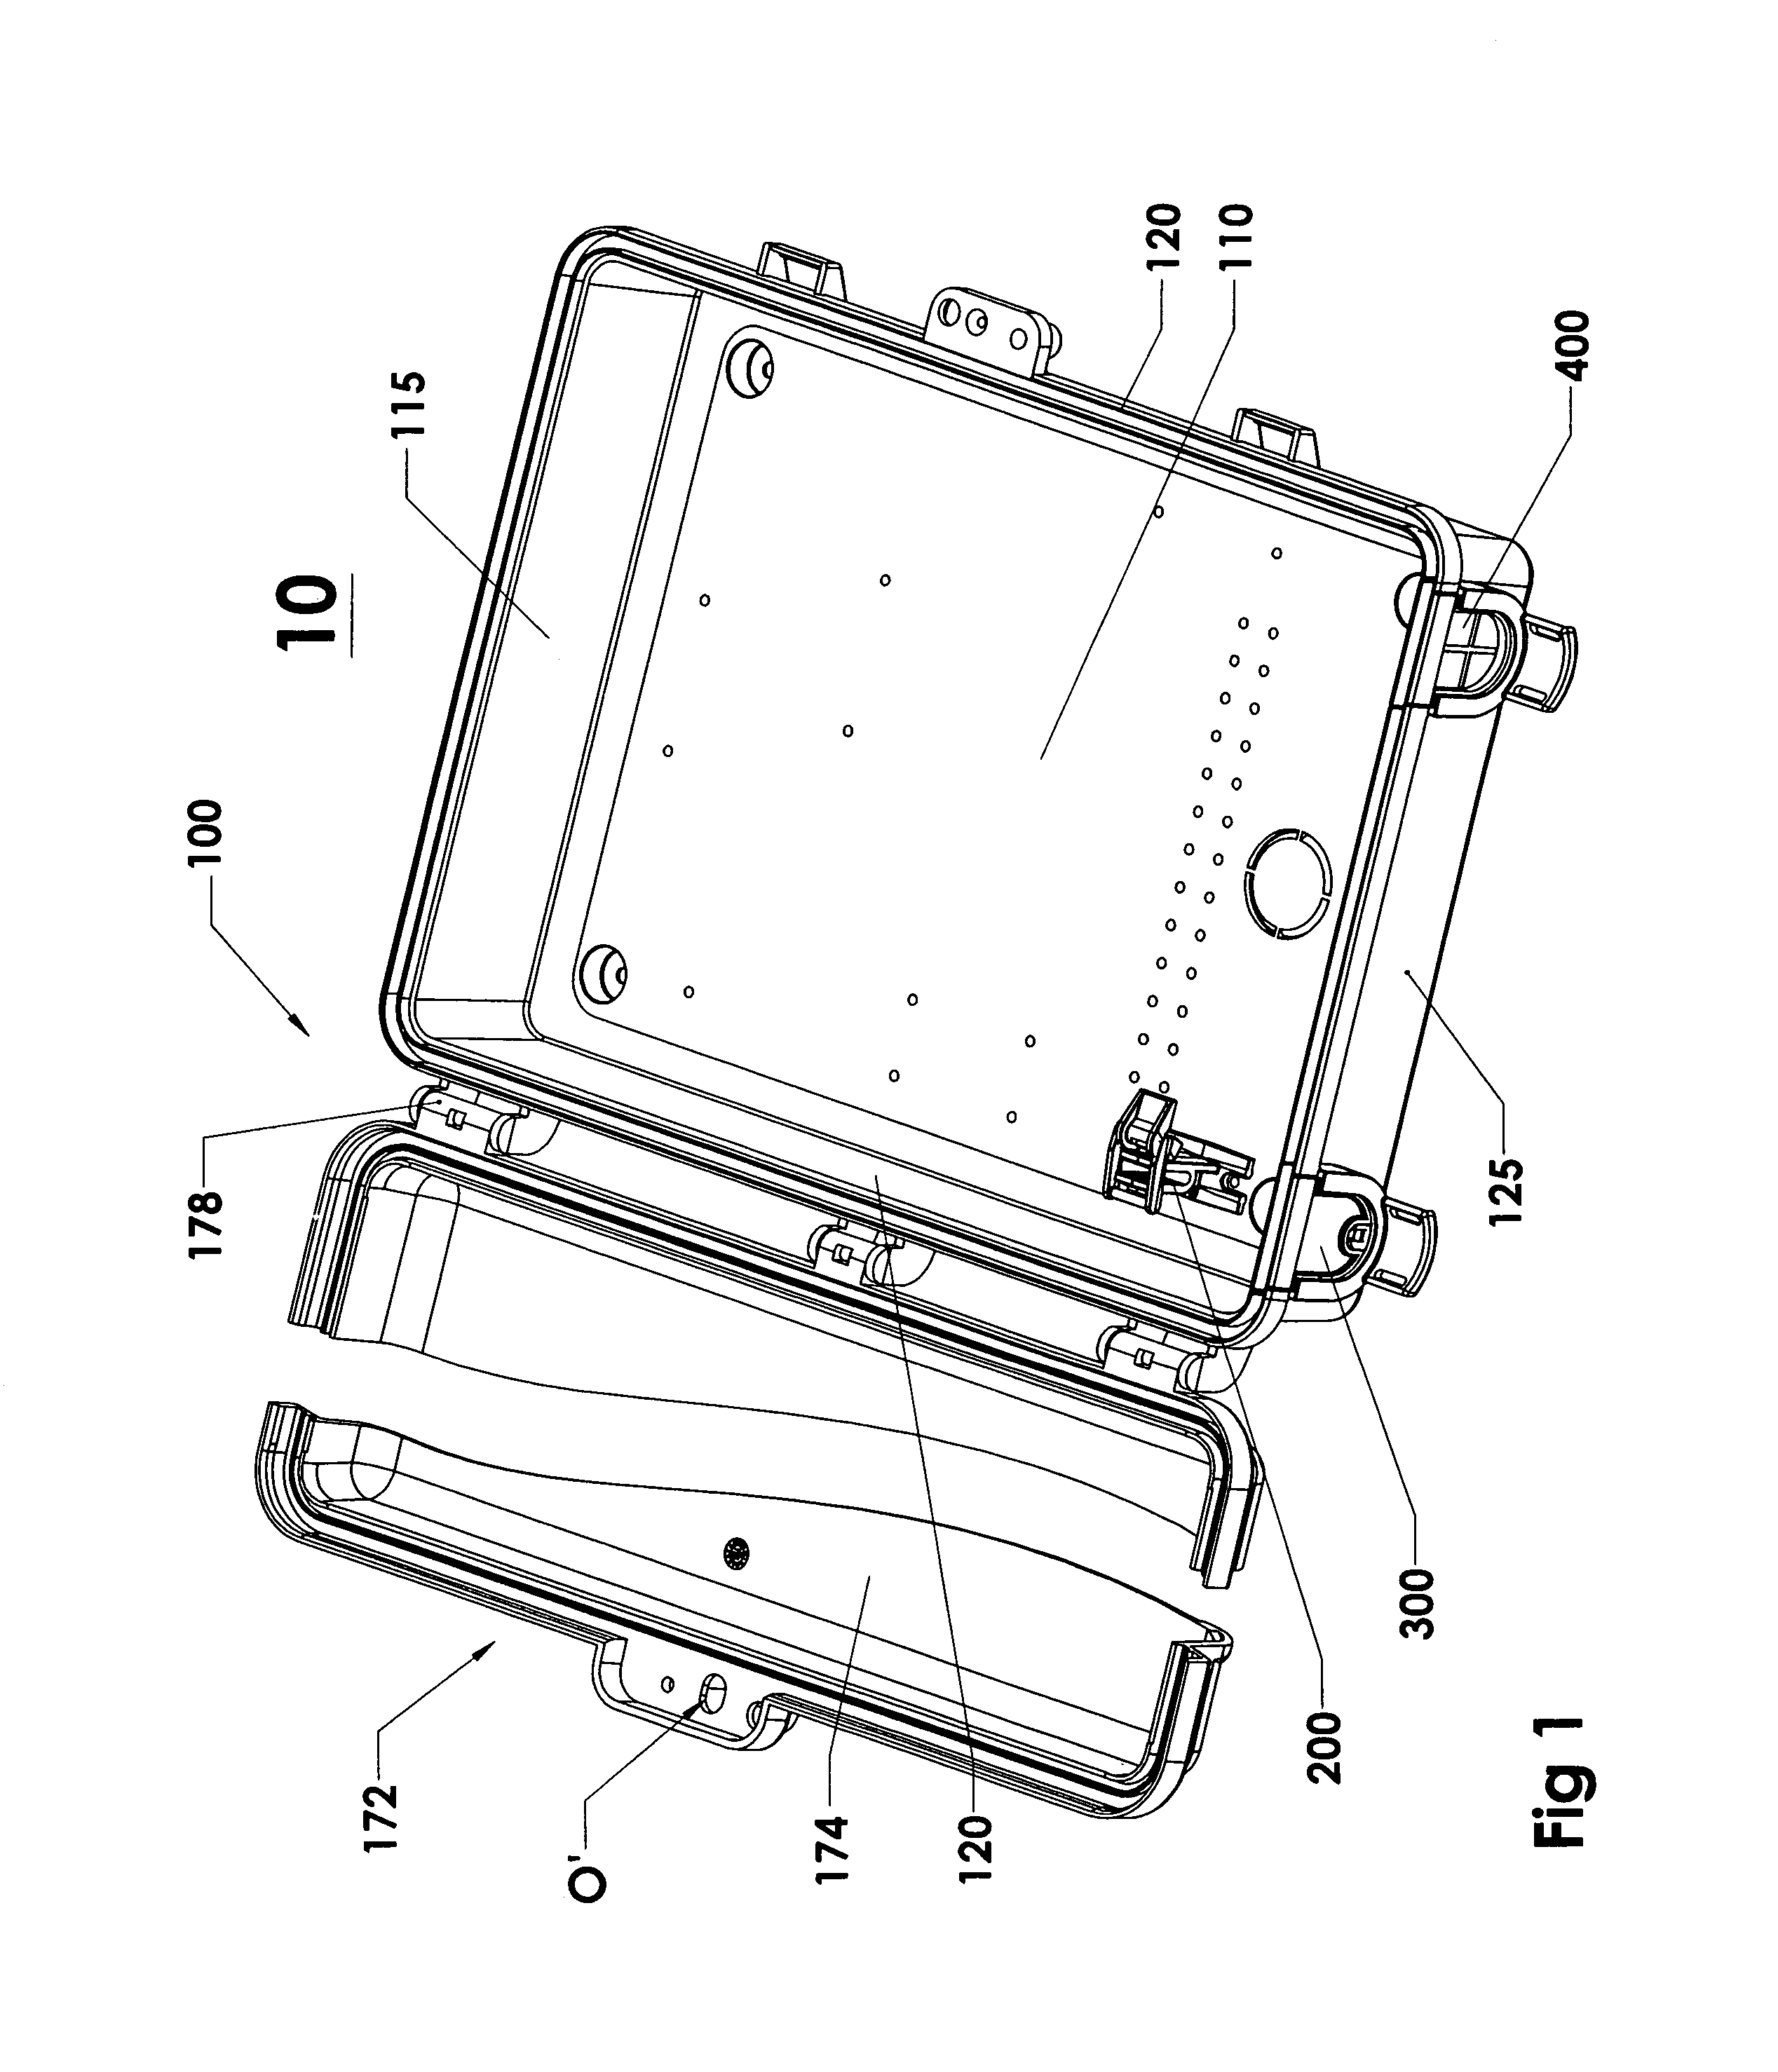 Retaining enclosure for above-ground fiber optic/cable network terminal